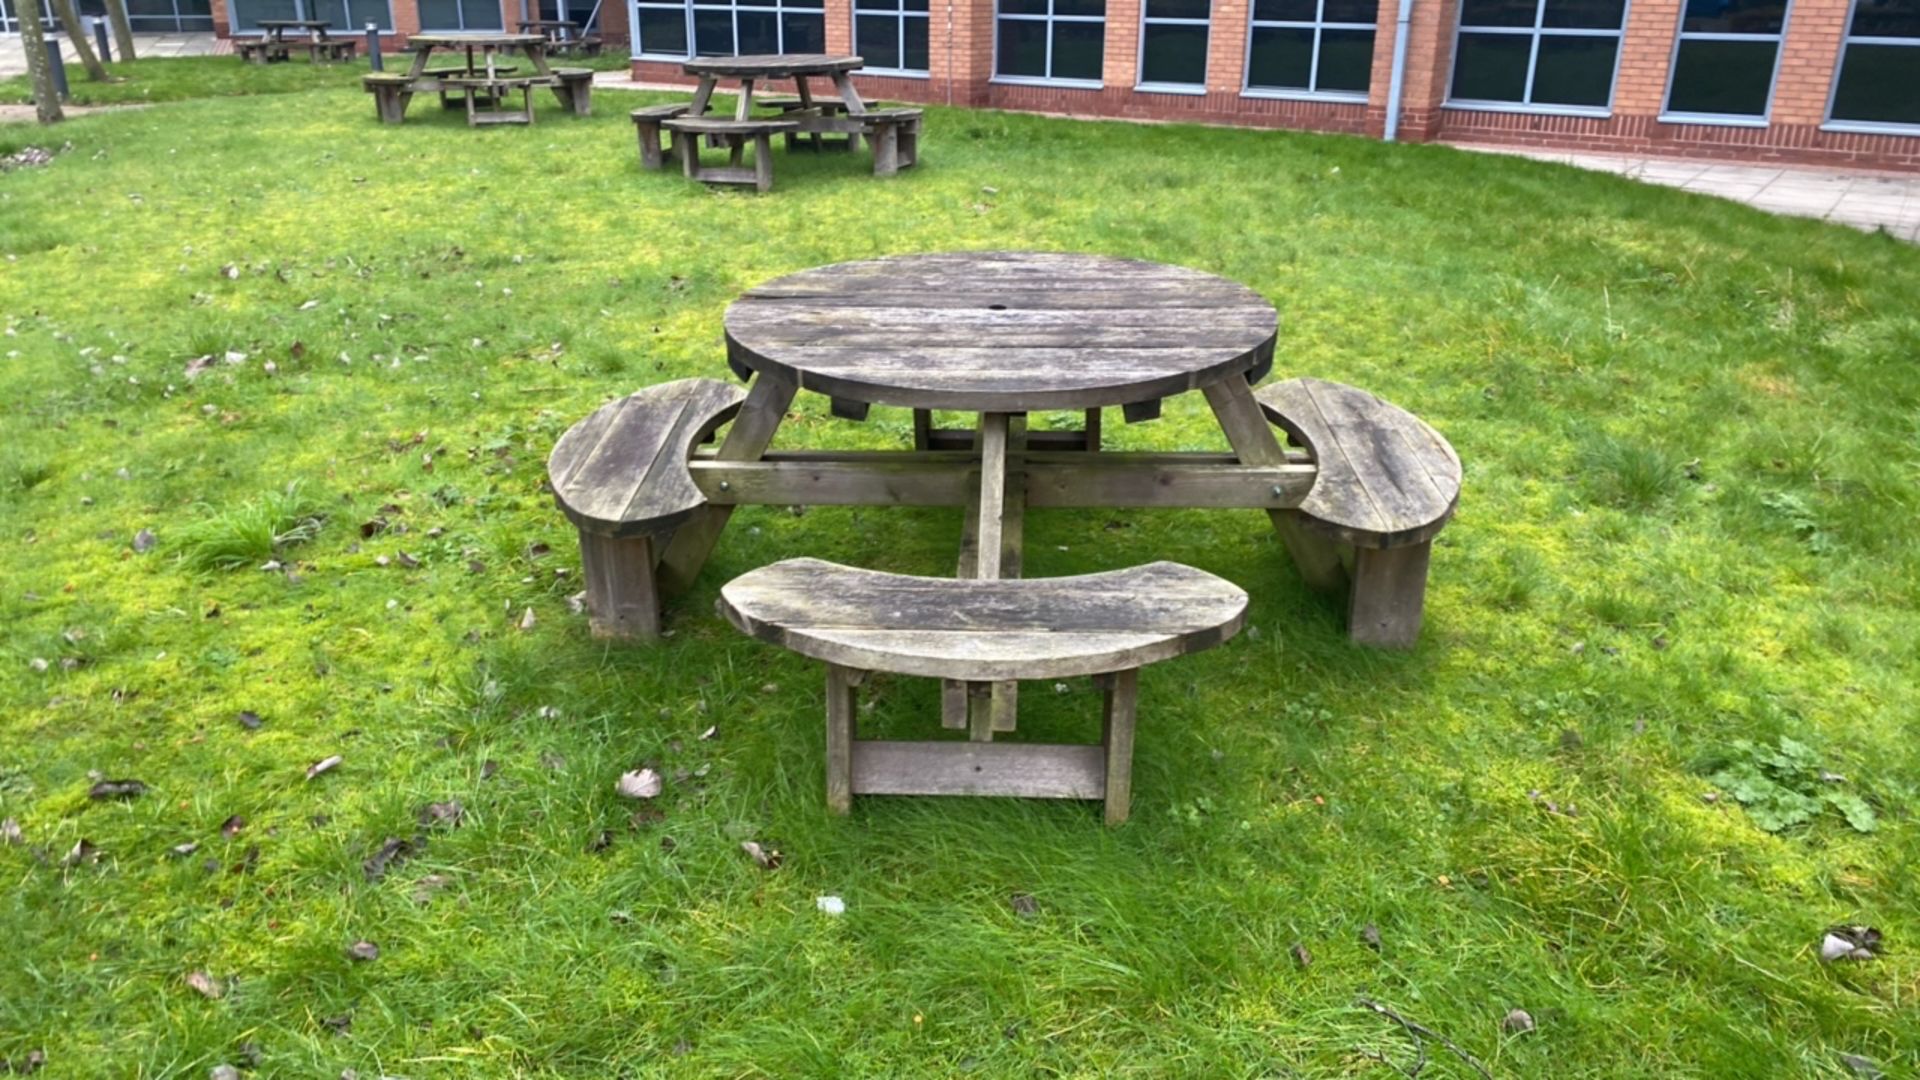 Outdoor Wooden Circular Seating Bench - Image 3 of 4